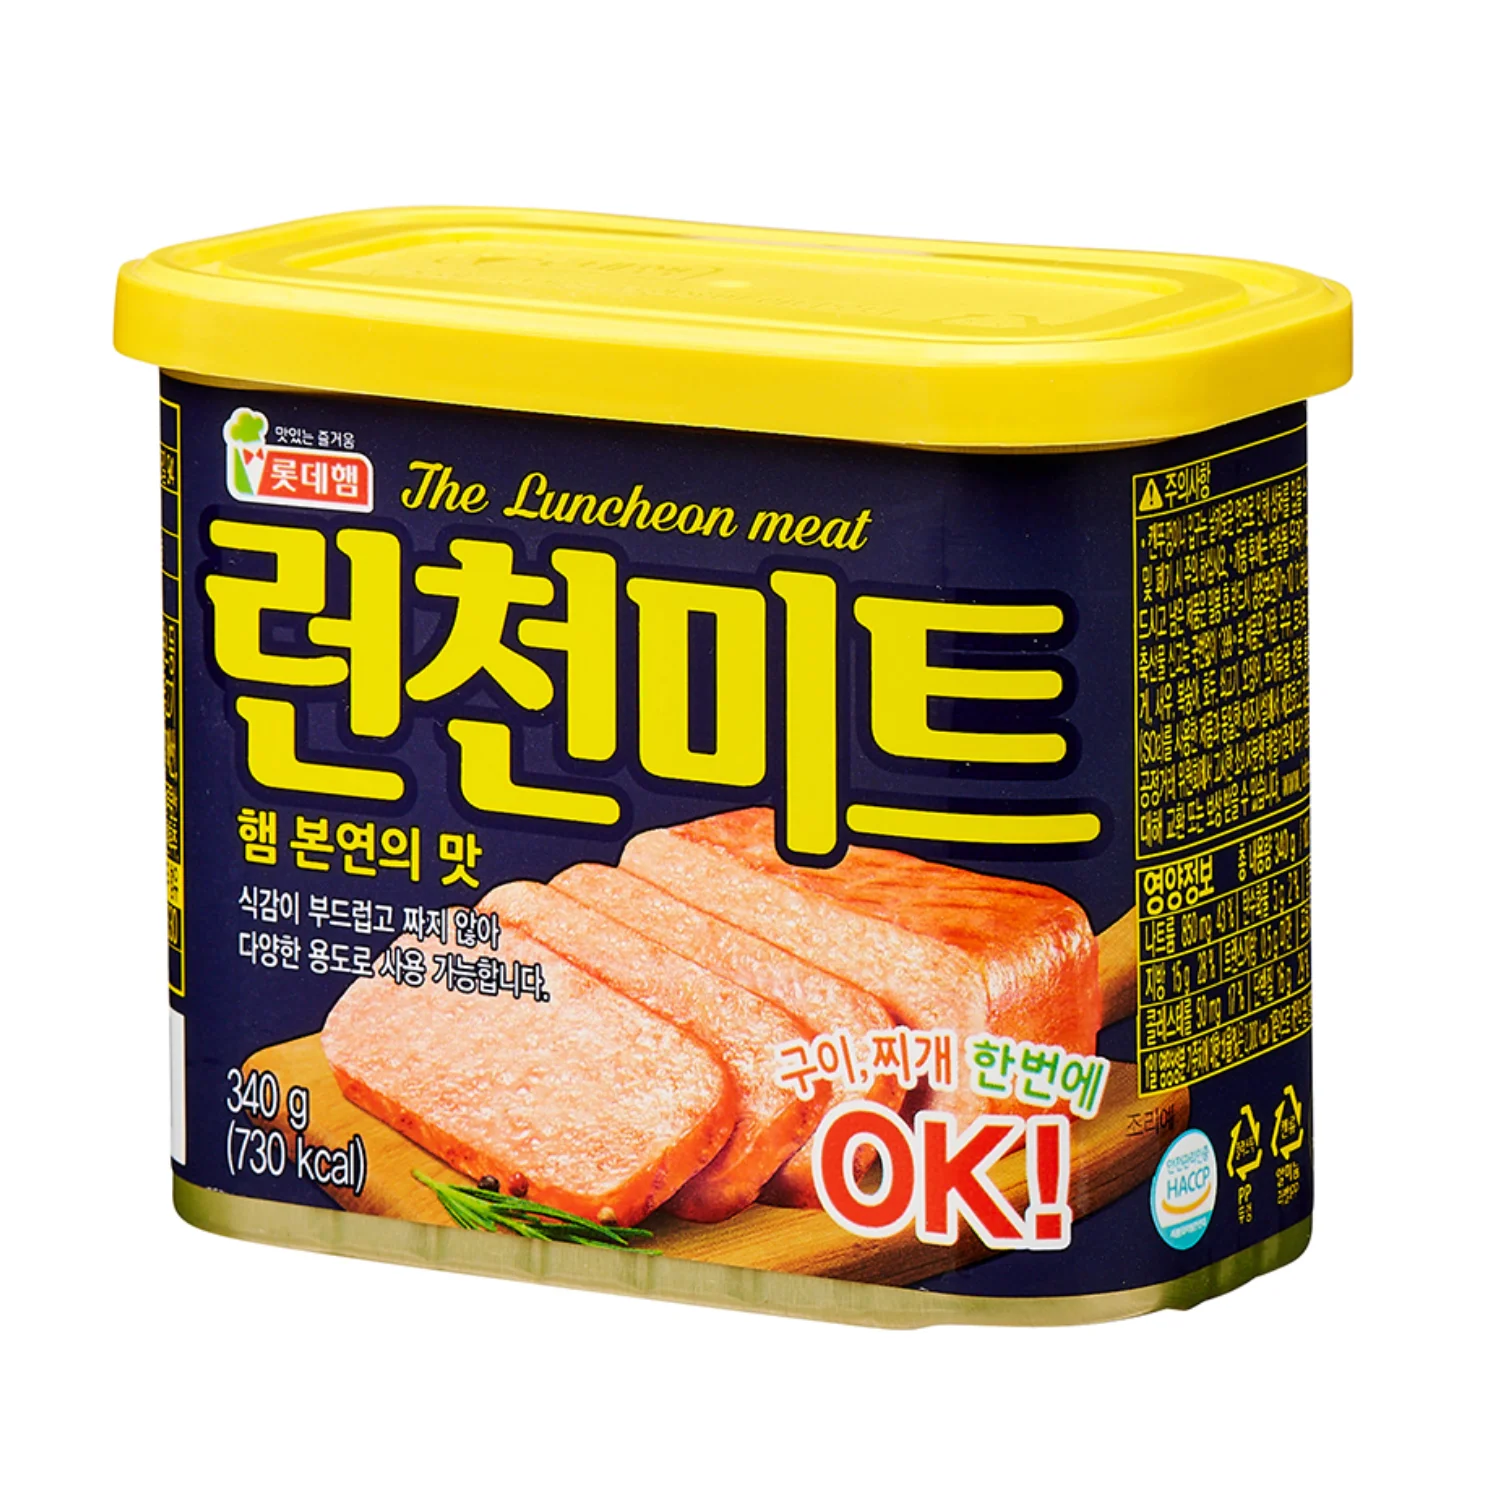 
Delicious Canned Pork product Lotte foods Luncheon meat 340g pork luncheon meat canned Korea brands 